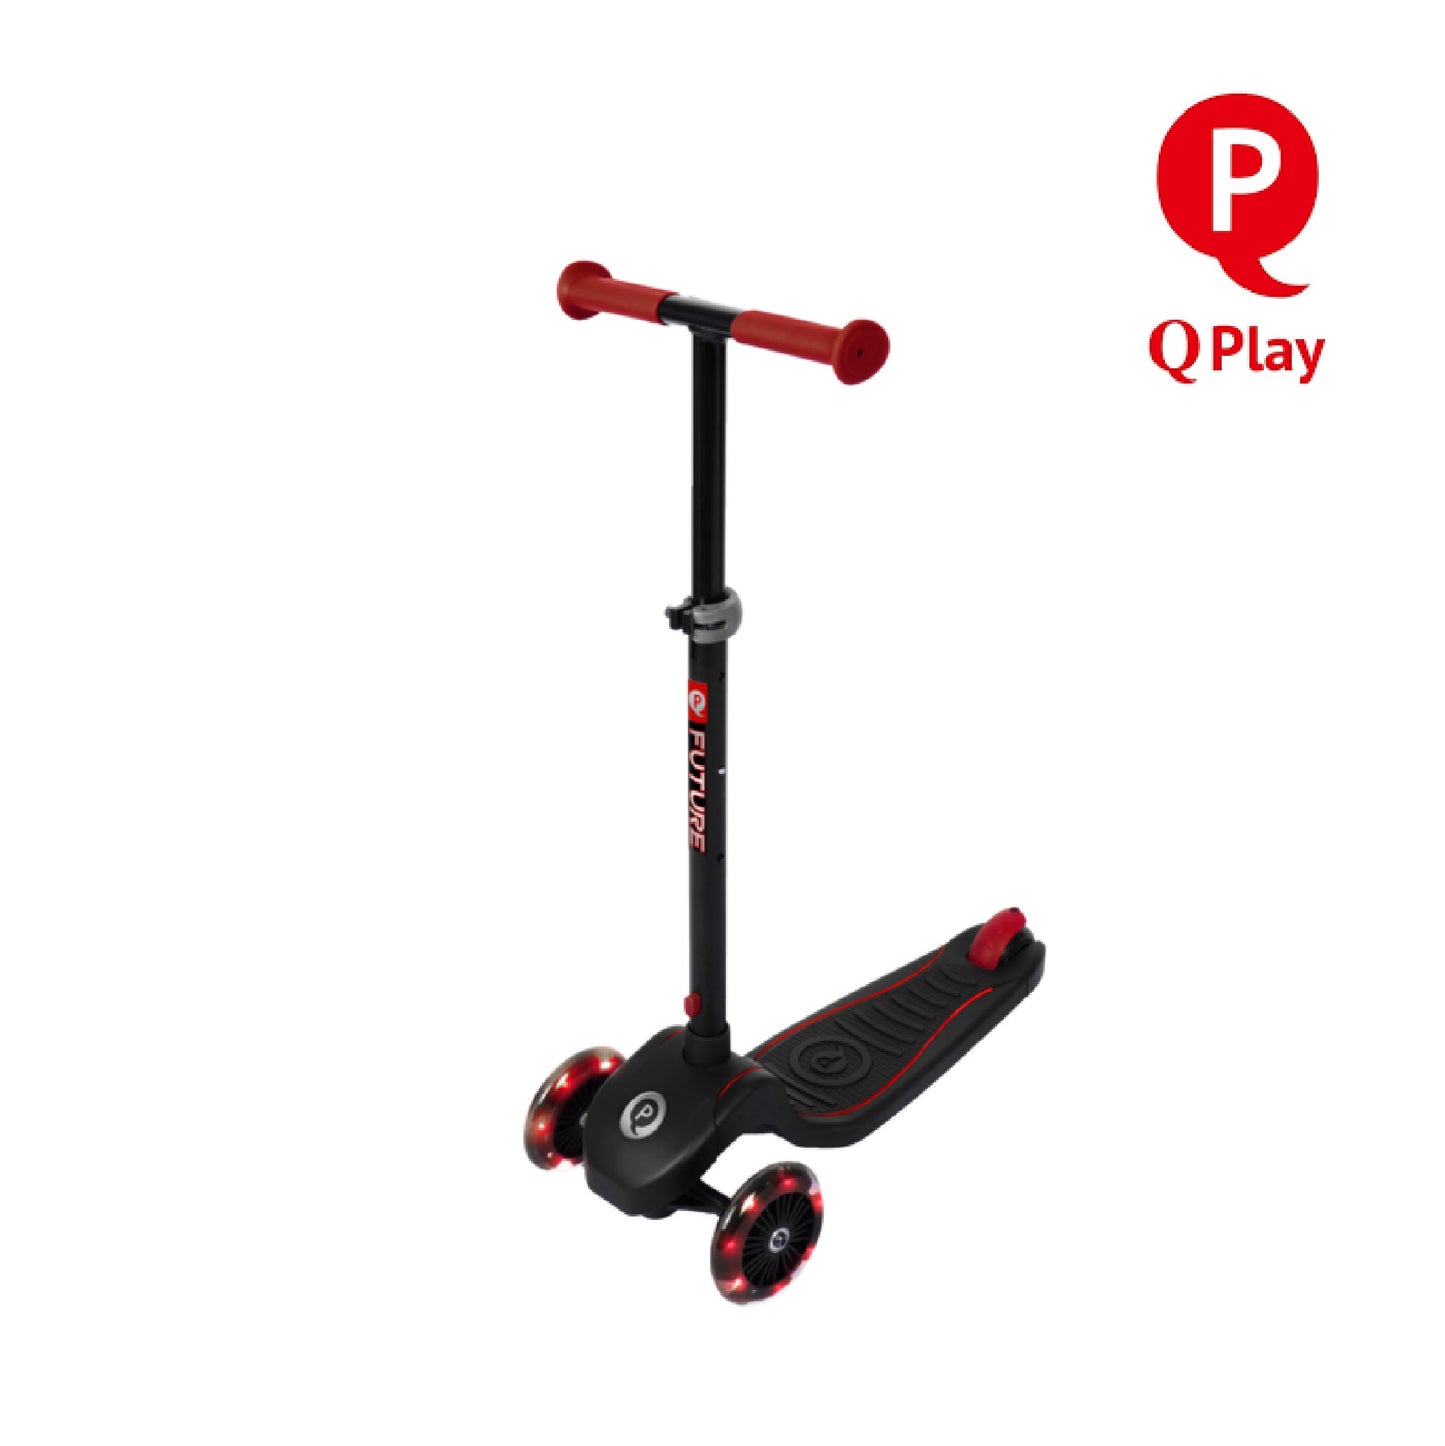 [Germany Q Play] ECO Future dazzling scooter - 3 colors available